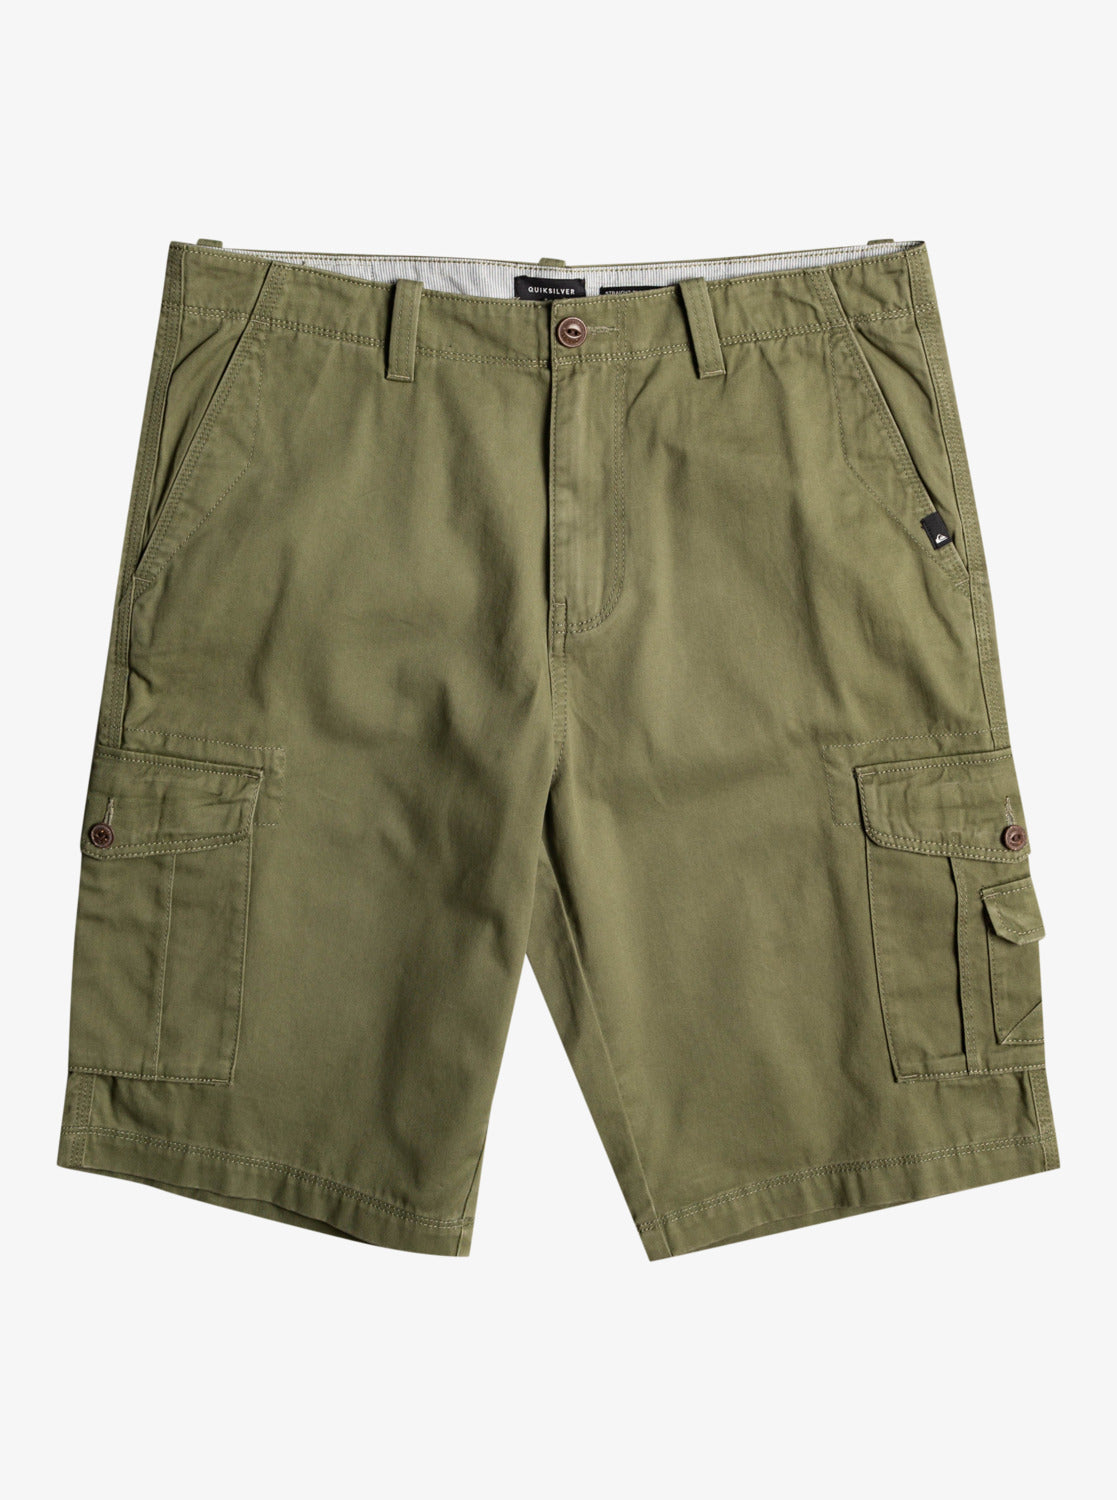 Quiksilver Crucial Battle Cargo Shorts in four leaf clover colourway from front